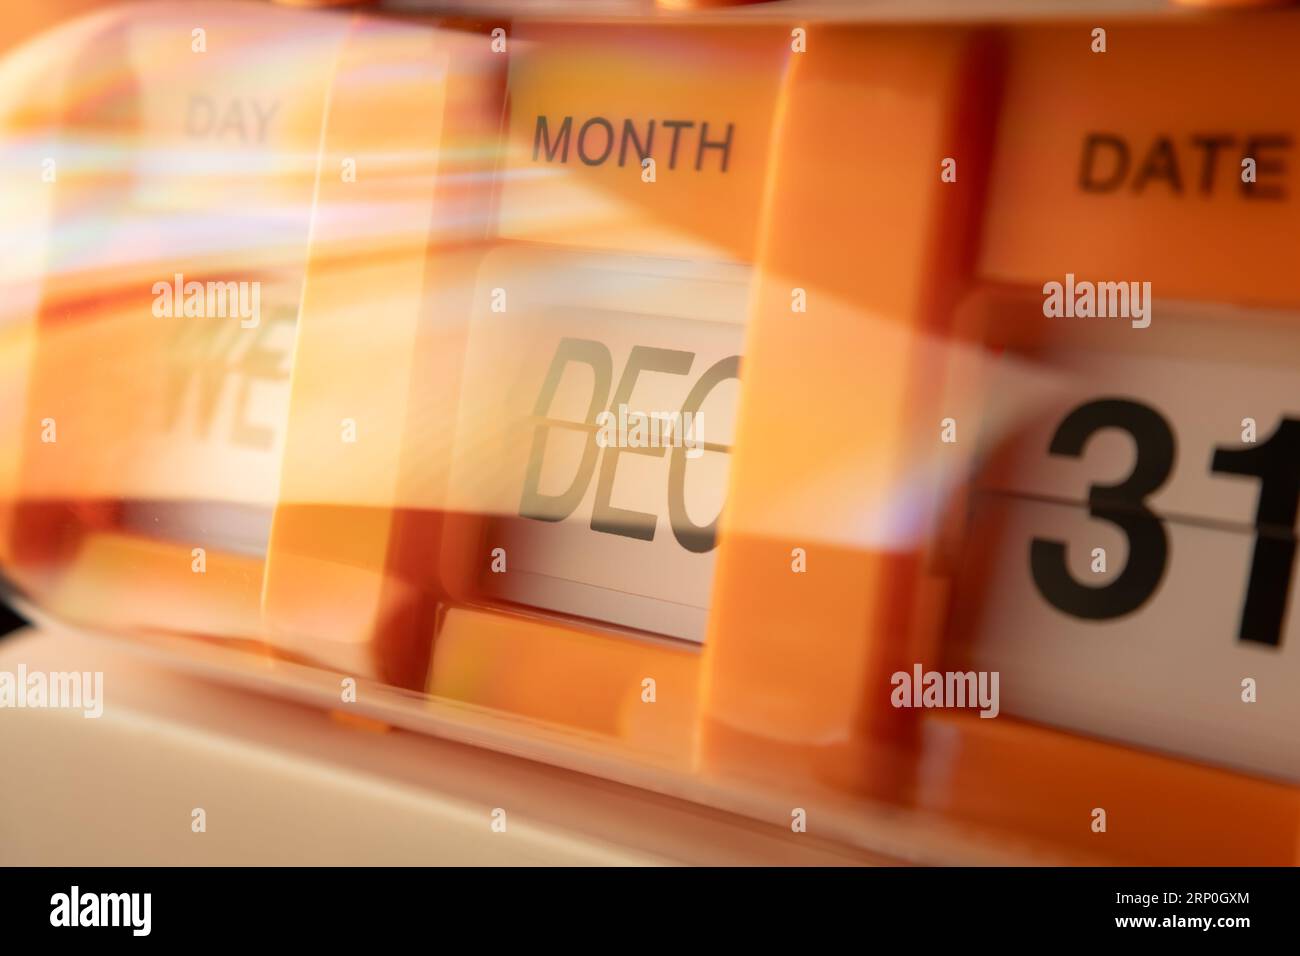 A flip clock showing last day of the year, December 31st Stock Photo